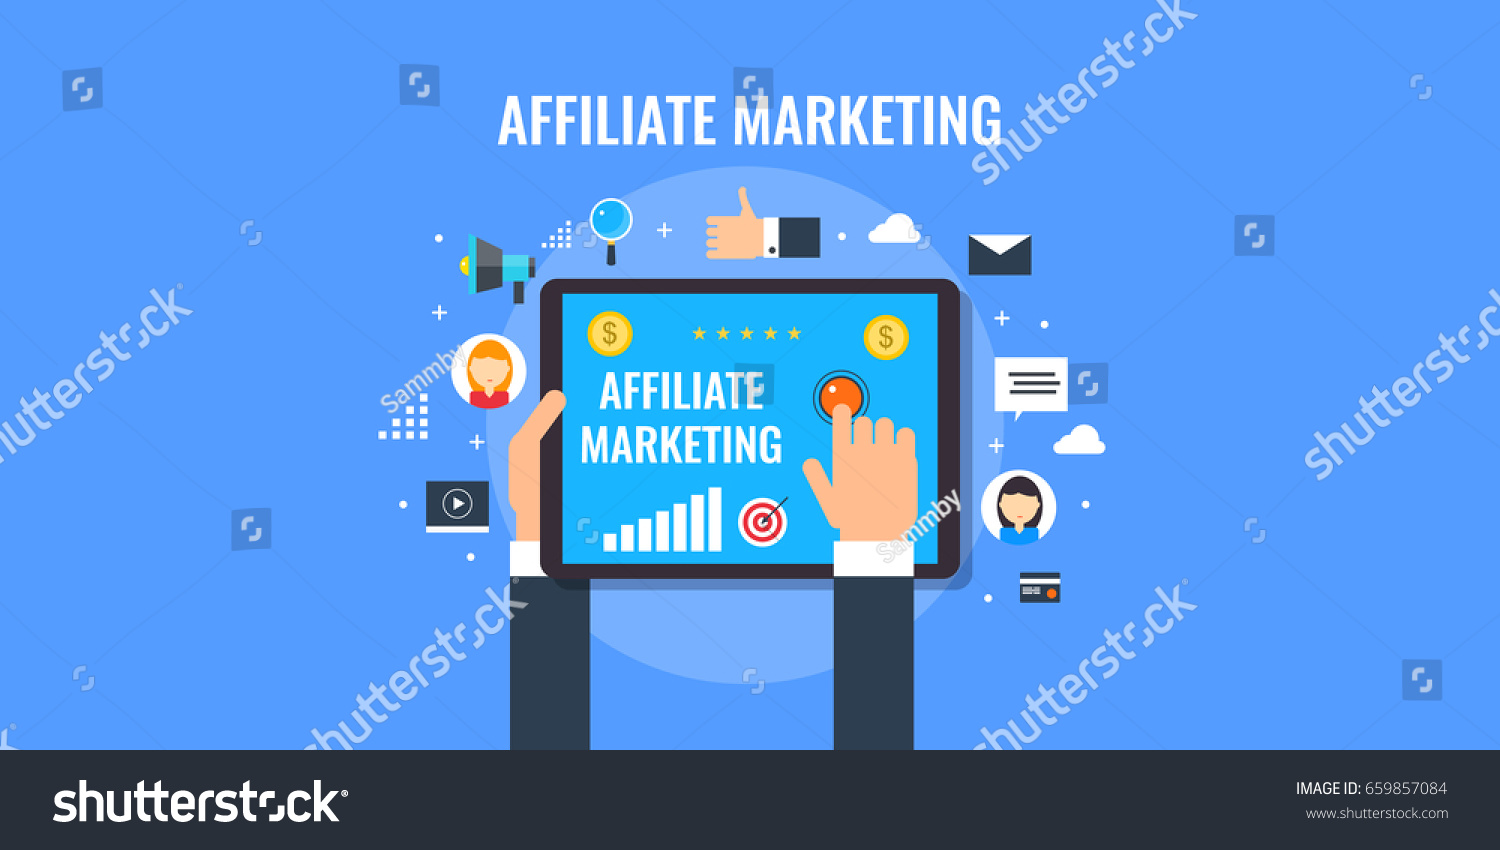 What Is Affiliate Marketing and How to Start It for Beginners?